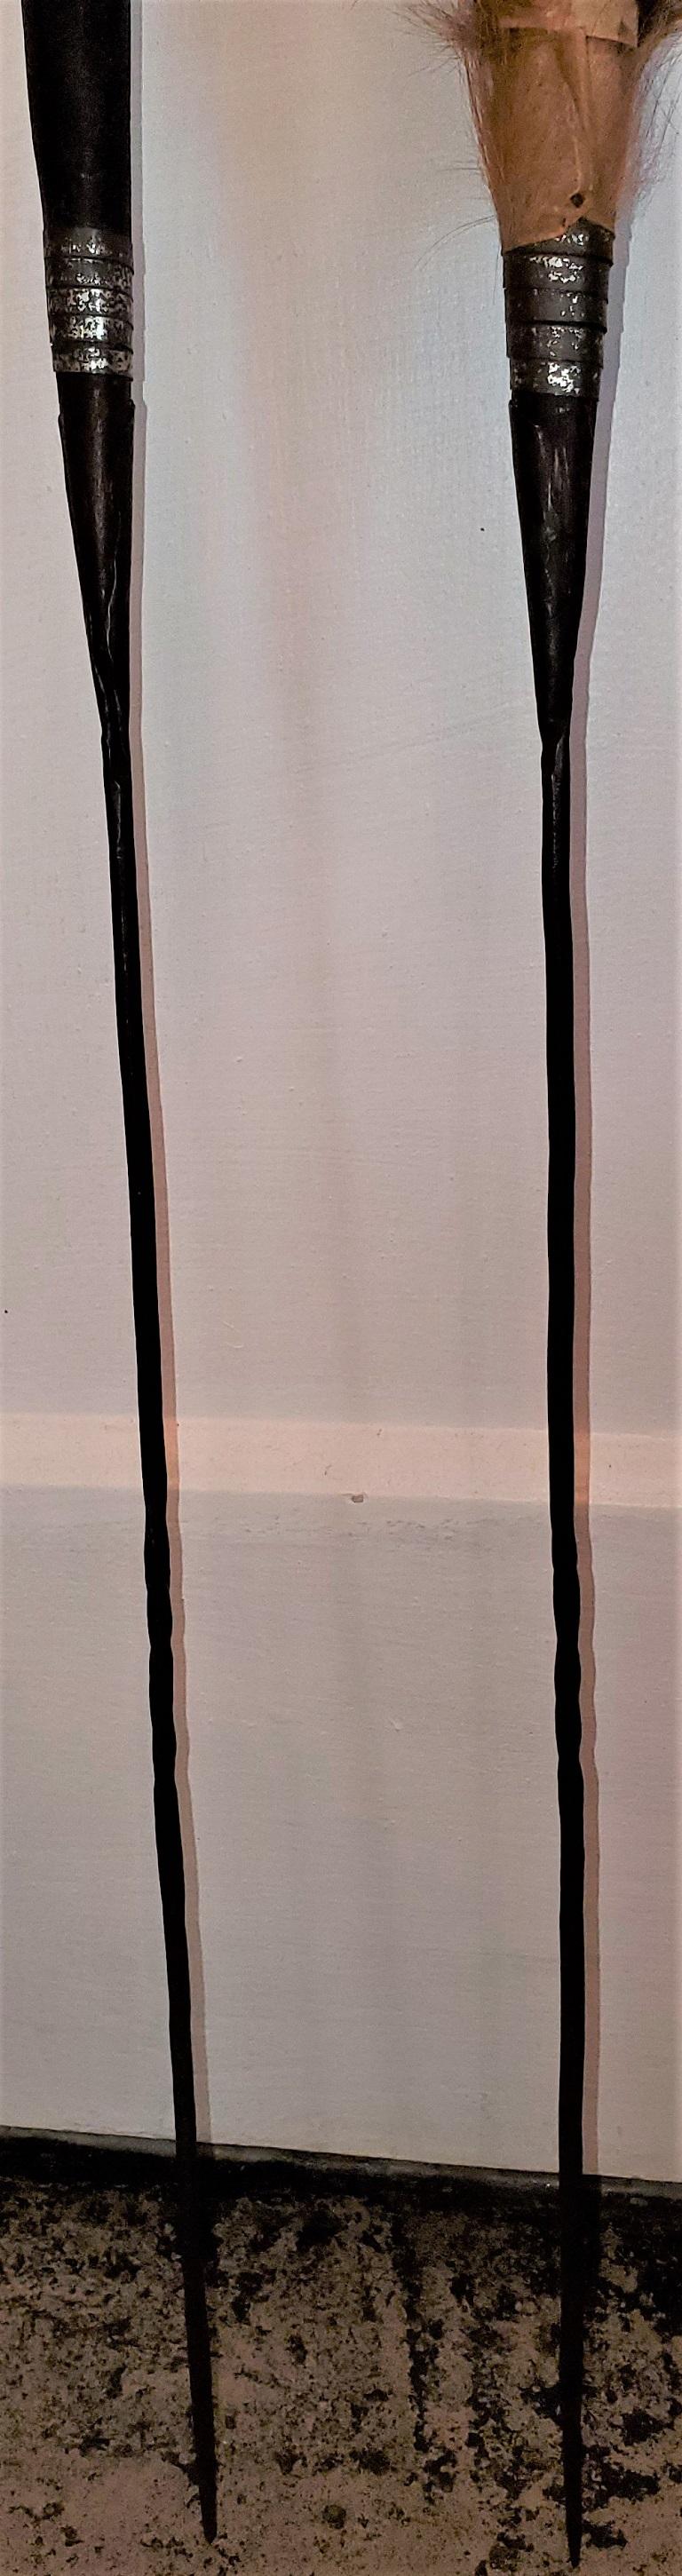 Presenting a very rare vintage mid-20th century pair of East African Throwing Short Spears.

Made of iron and wood and covered in traditional animal fur (probably antelope).

Probably made in Sudan or Kenya in the 1950s.

The spear end is